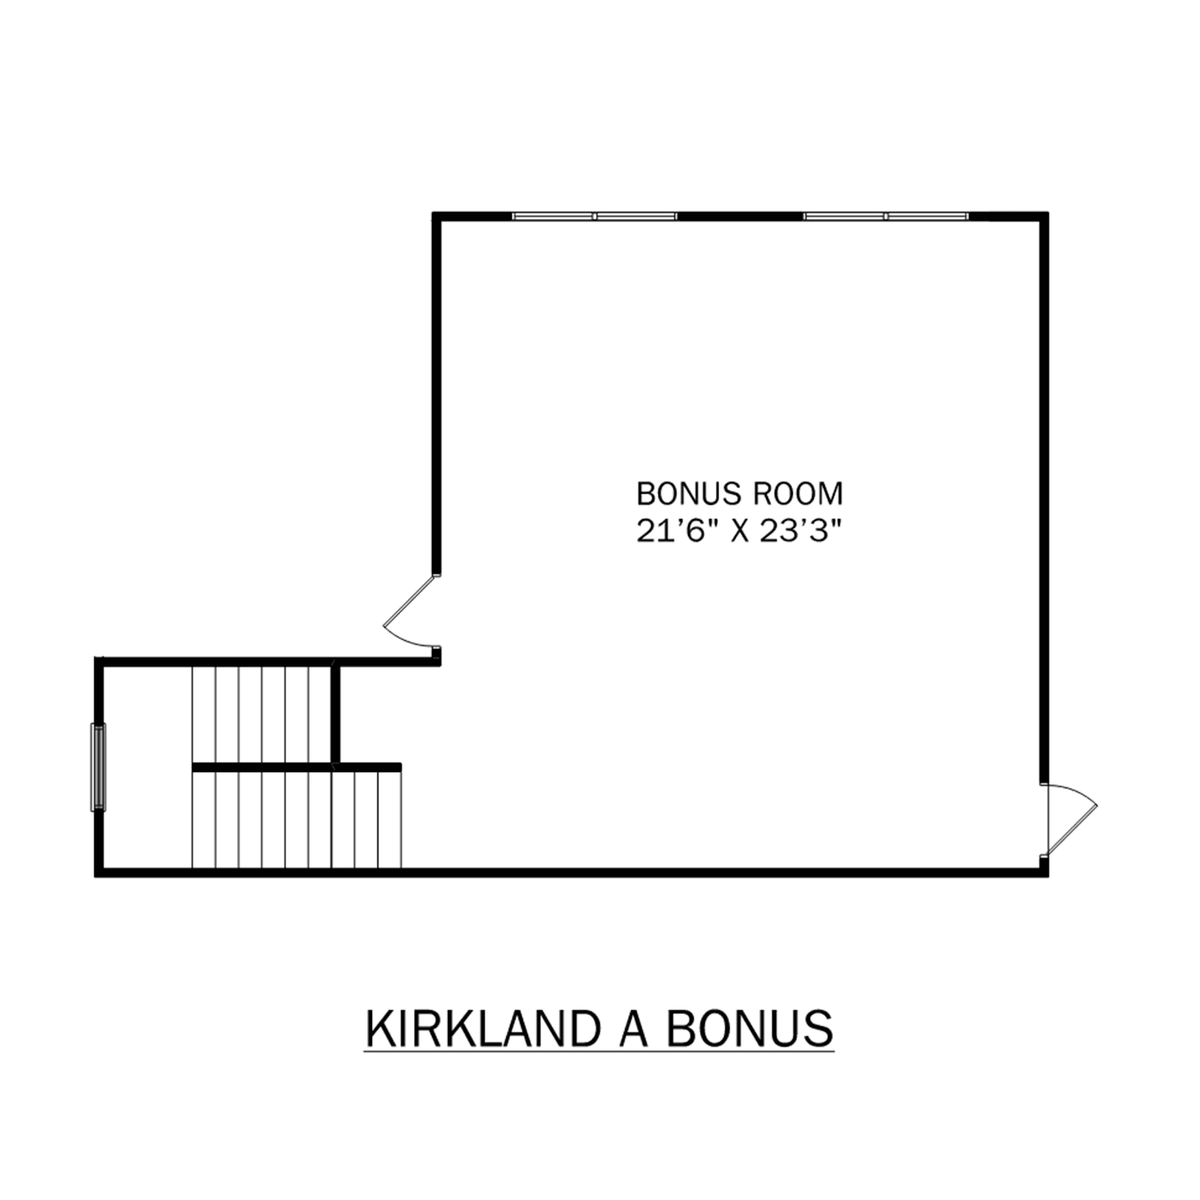 2 - The Kirkland with Bonus buildable floor plan layout in Davidson Homes' Kendall Downs community.